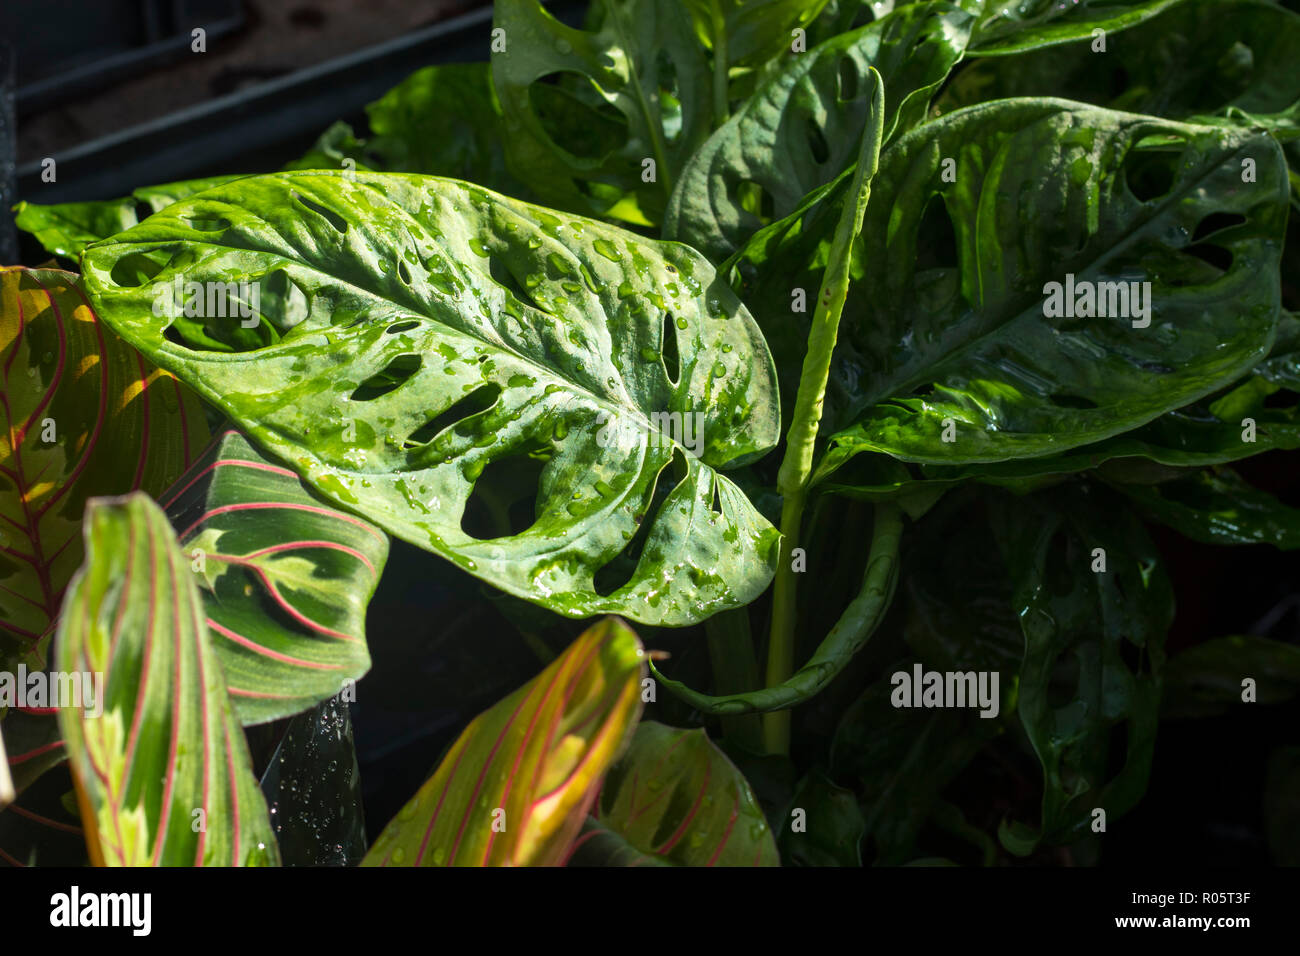 the Green plant in the garden. Fresh green and white leaf background (Dieffenbachia). Stock Photo